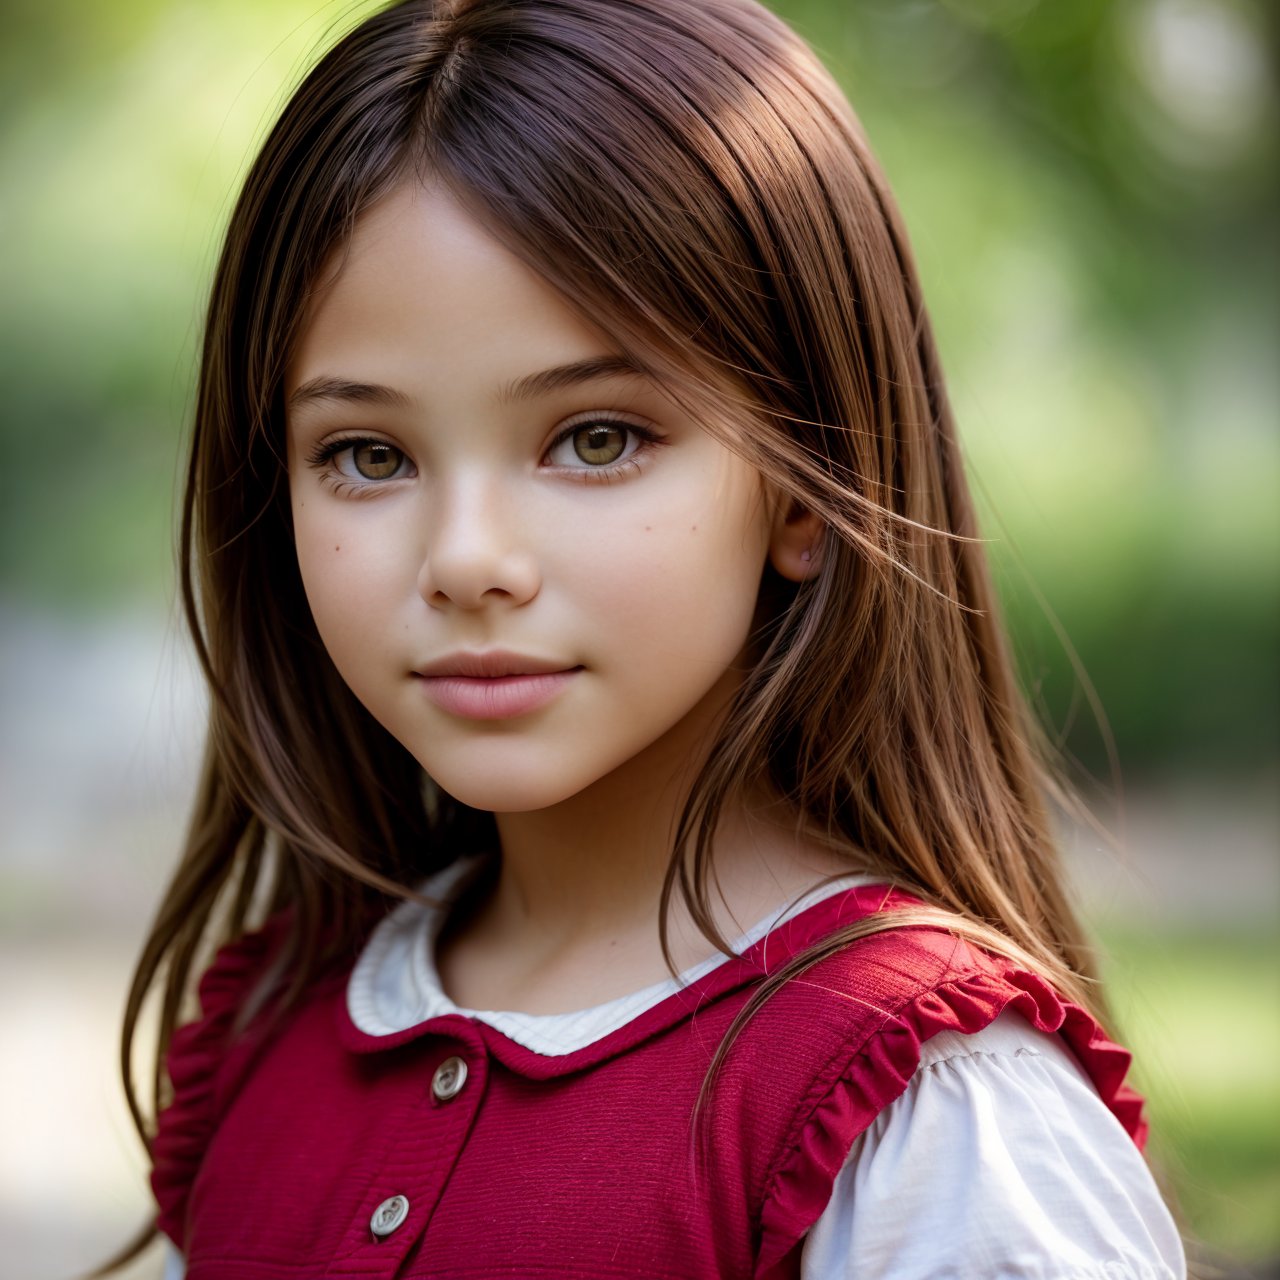 (masterpiece:1.3), best quality, extra resolution, wallpaper, dolly short, close up of cute (AIDA_LoRA_LG2014:1.14) <lora:AIDA_LoRA_LG2014:0.71> as little girl in a simple red shirt in the park, outdoors, pretty face, intimate, cinematic, dramatic, hyper realistic, studio photo, studio photo, kkw-ph1, hdr, f1.8 , getty images, (colorful:1.1)